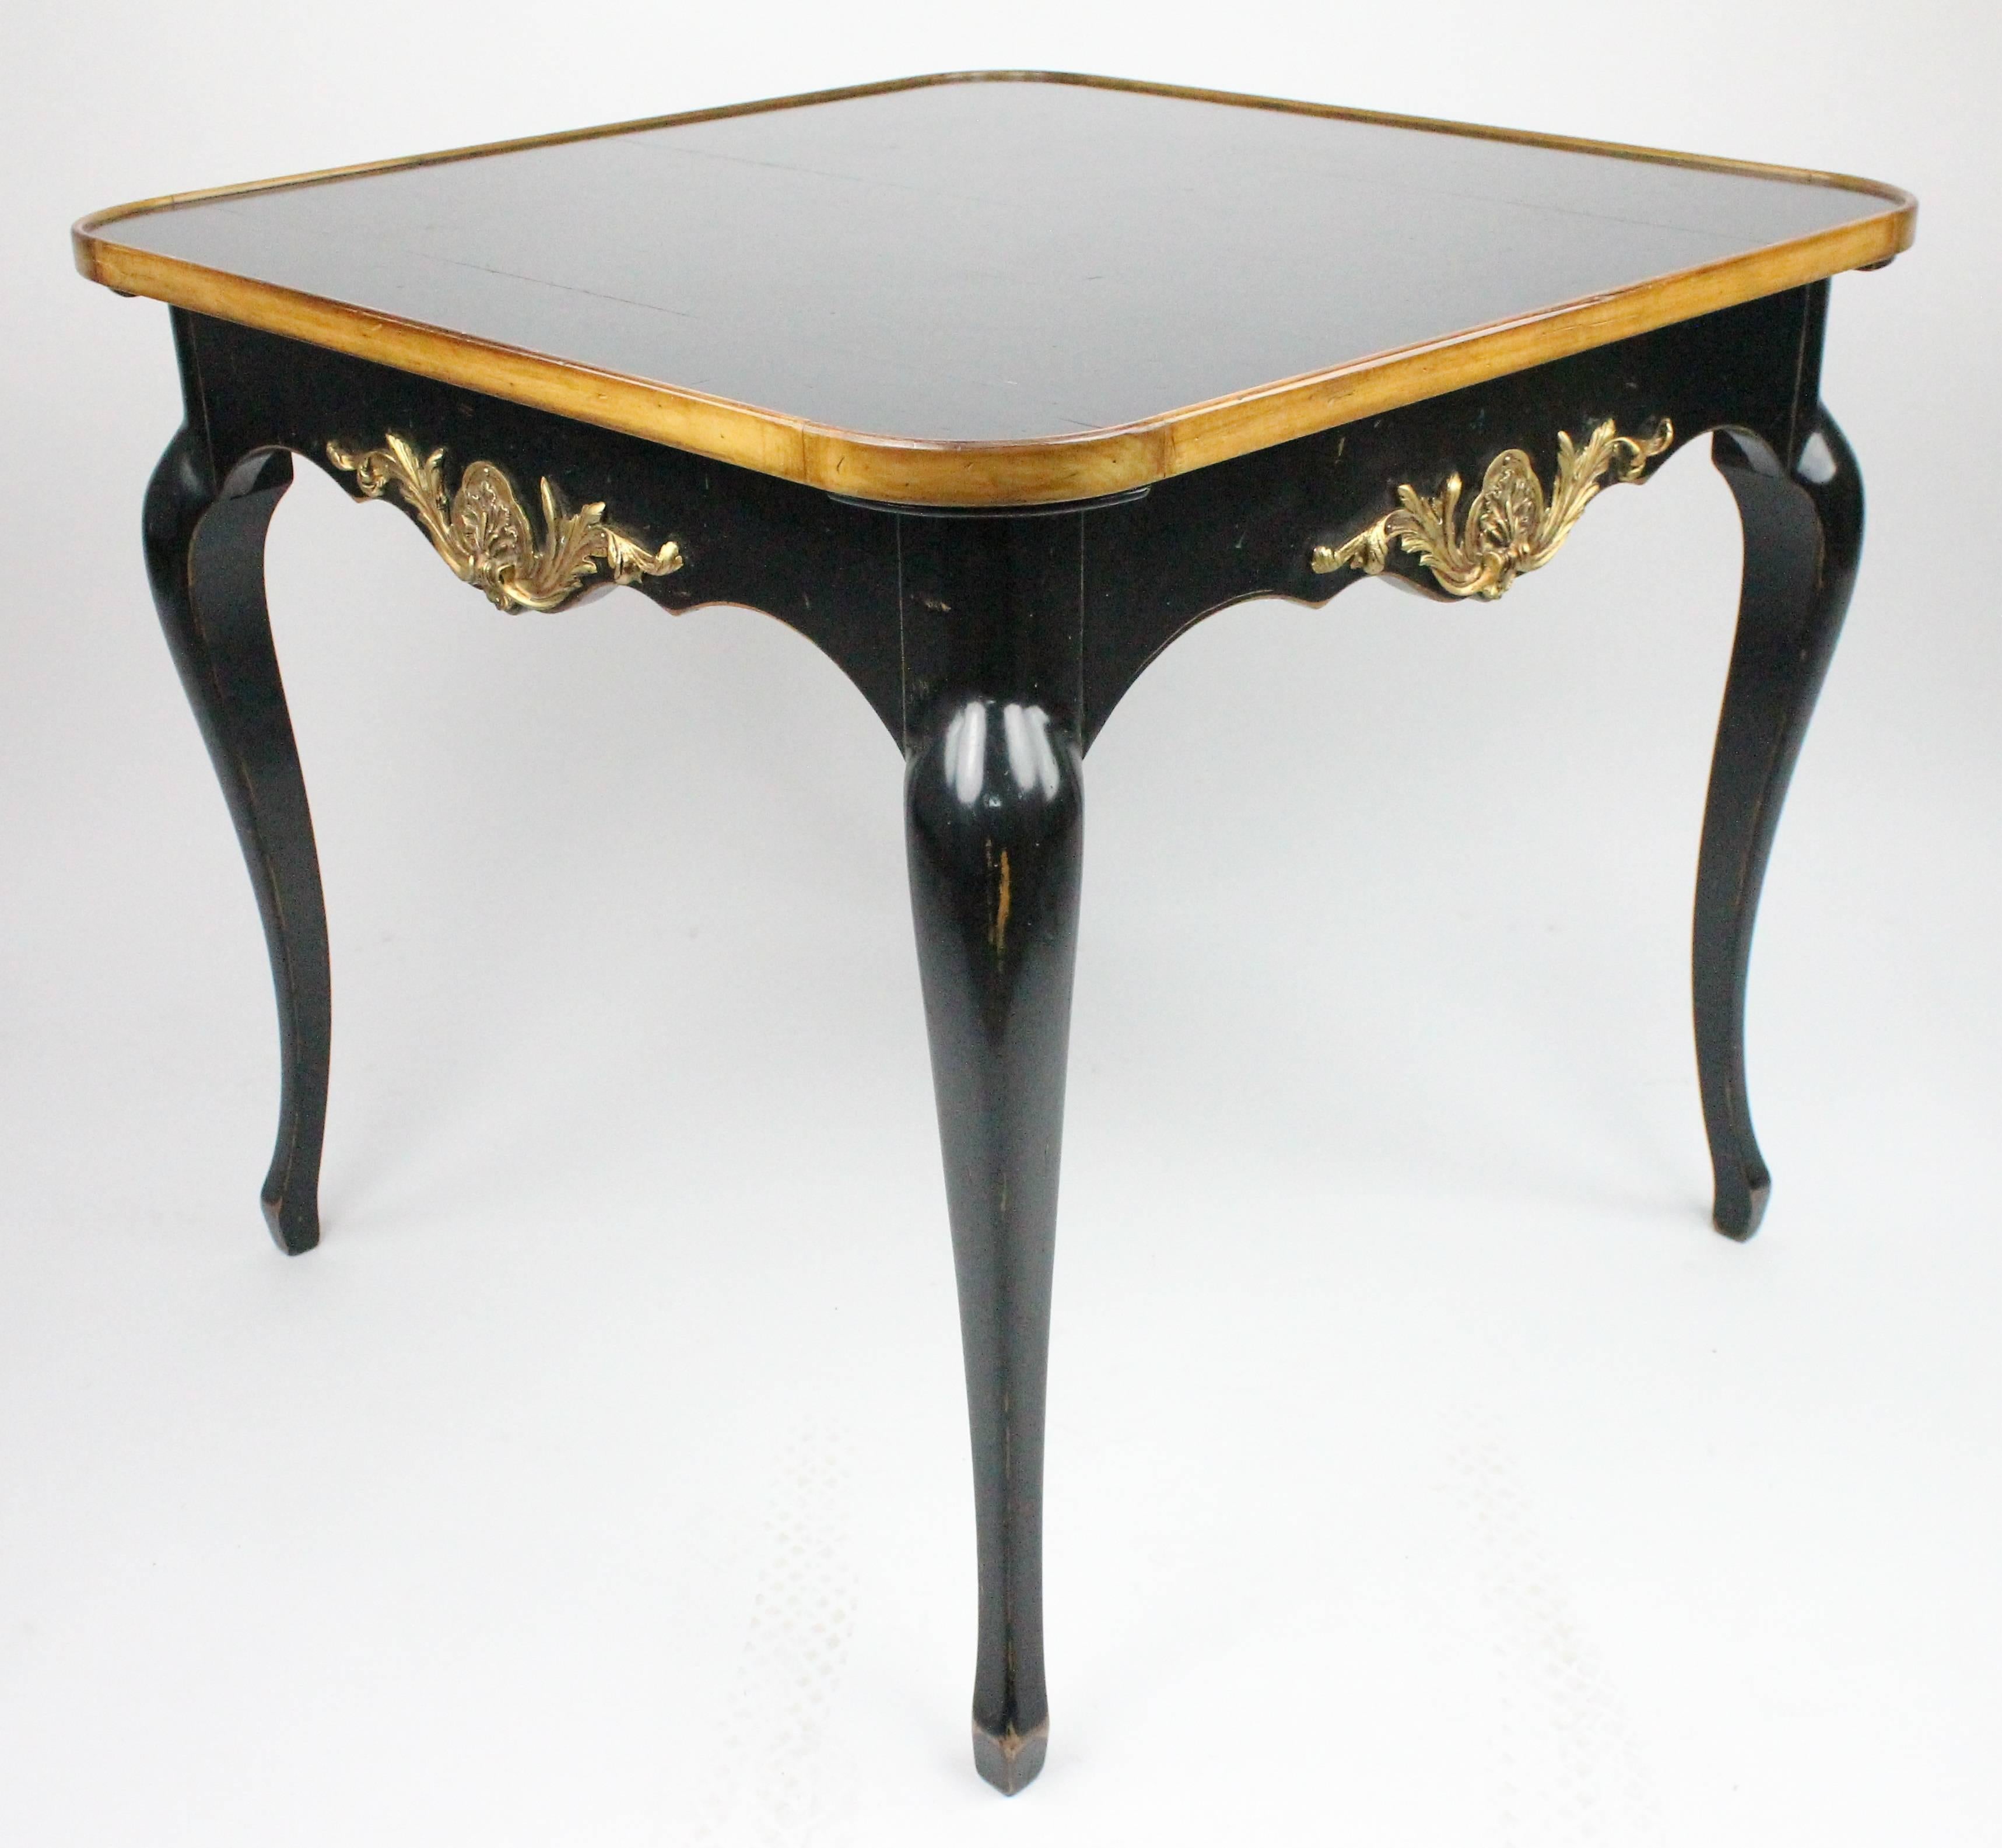 A wonderful card or games table by the French firm Moissonnier.
Fully stamped with manufacturer mark, see images.
The top is reversible, with a red leather top and also a black painted top.
This table is made in the Louis XV style. It is made in